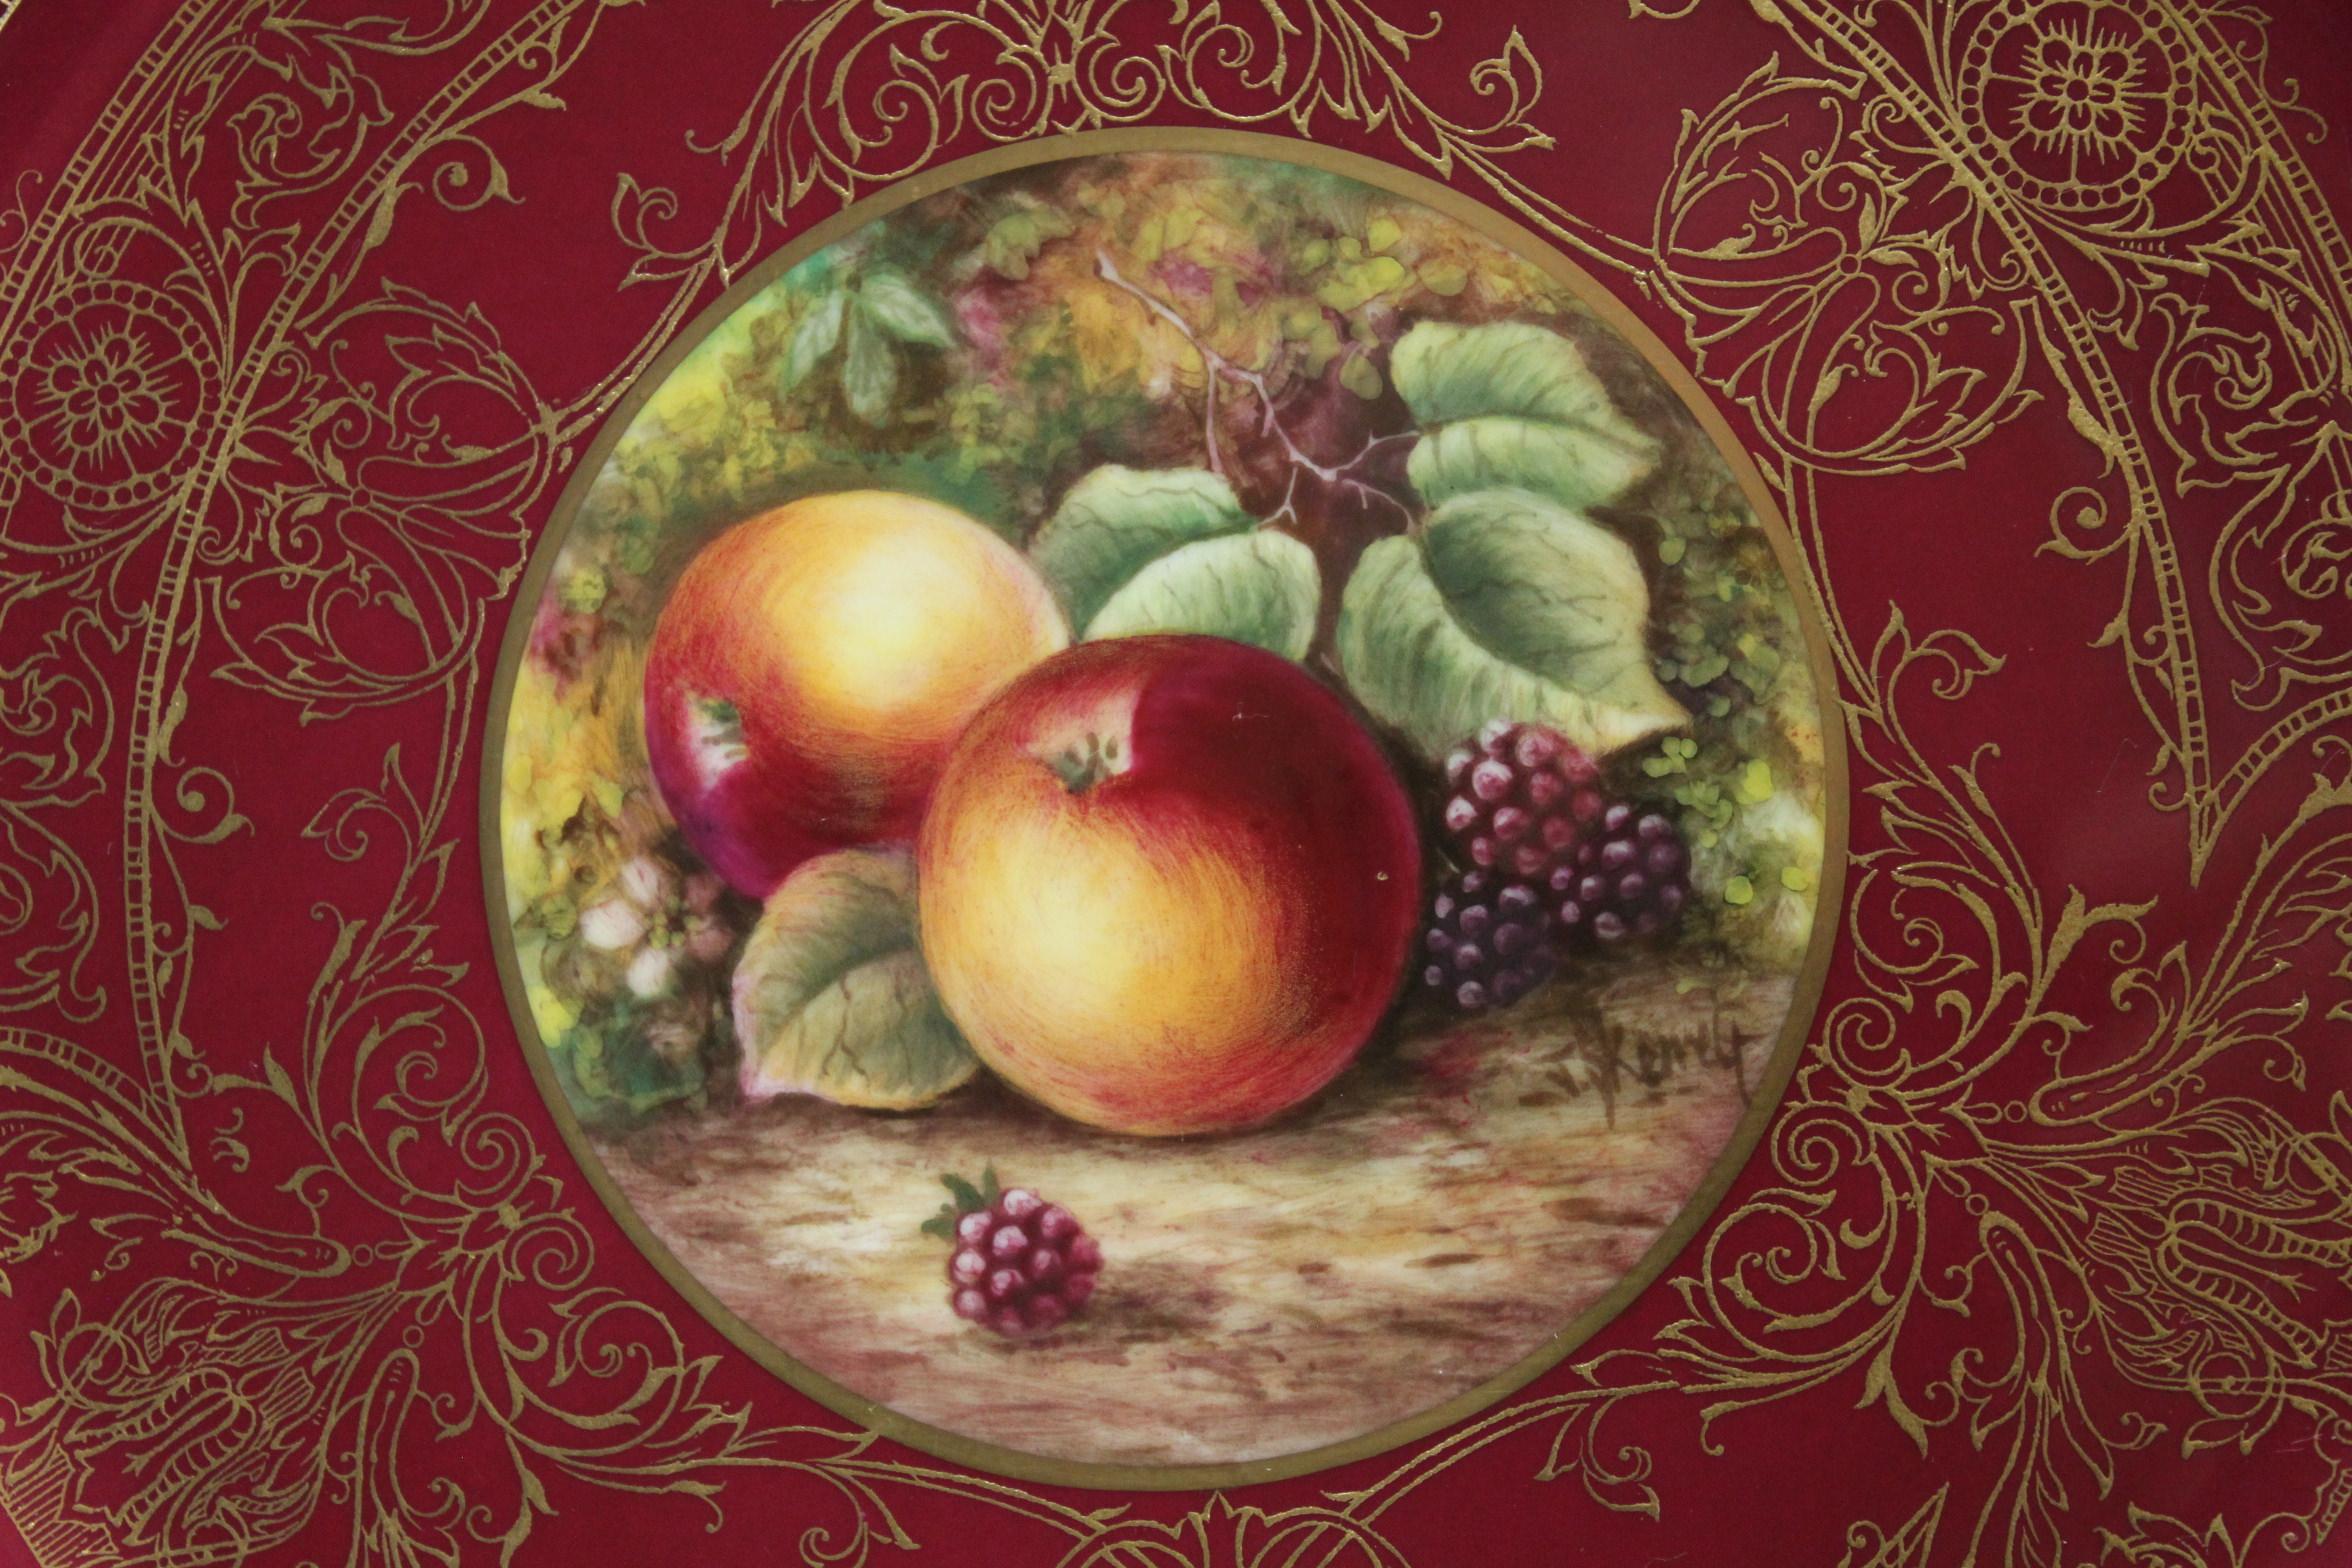 This Royal Worcester porcelain cabinet plate is decorated with a centrepiece of fruit painted by James Skerrett (b. 1954) who joined Royal Worcester in 1969 and specialised in limited editions and paintings of fruit. The centrepiece, which features